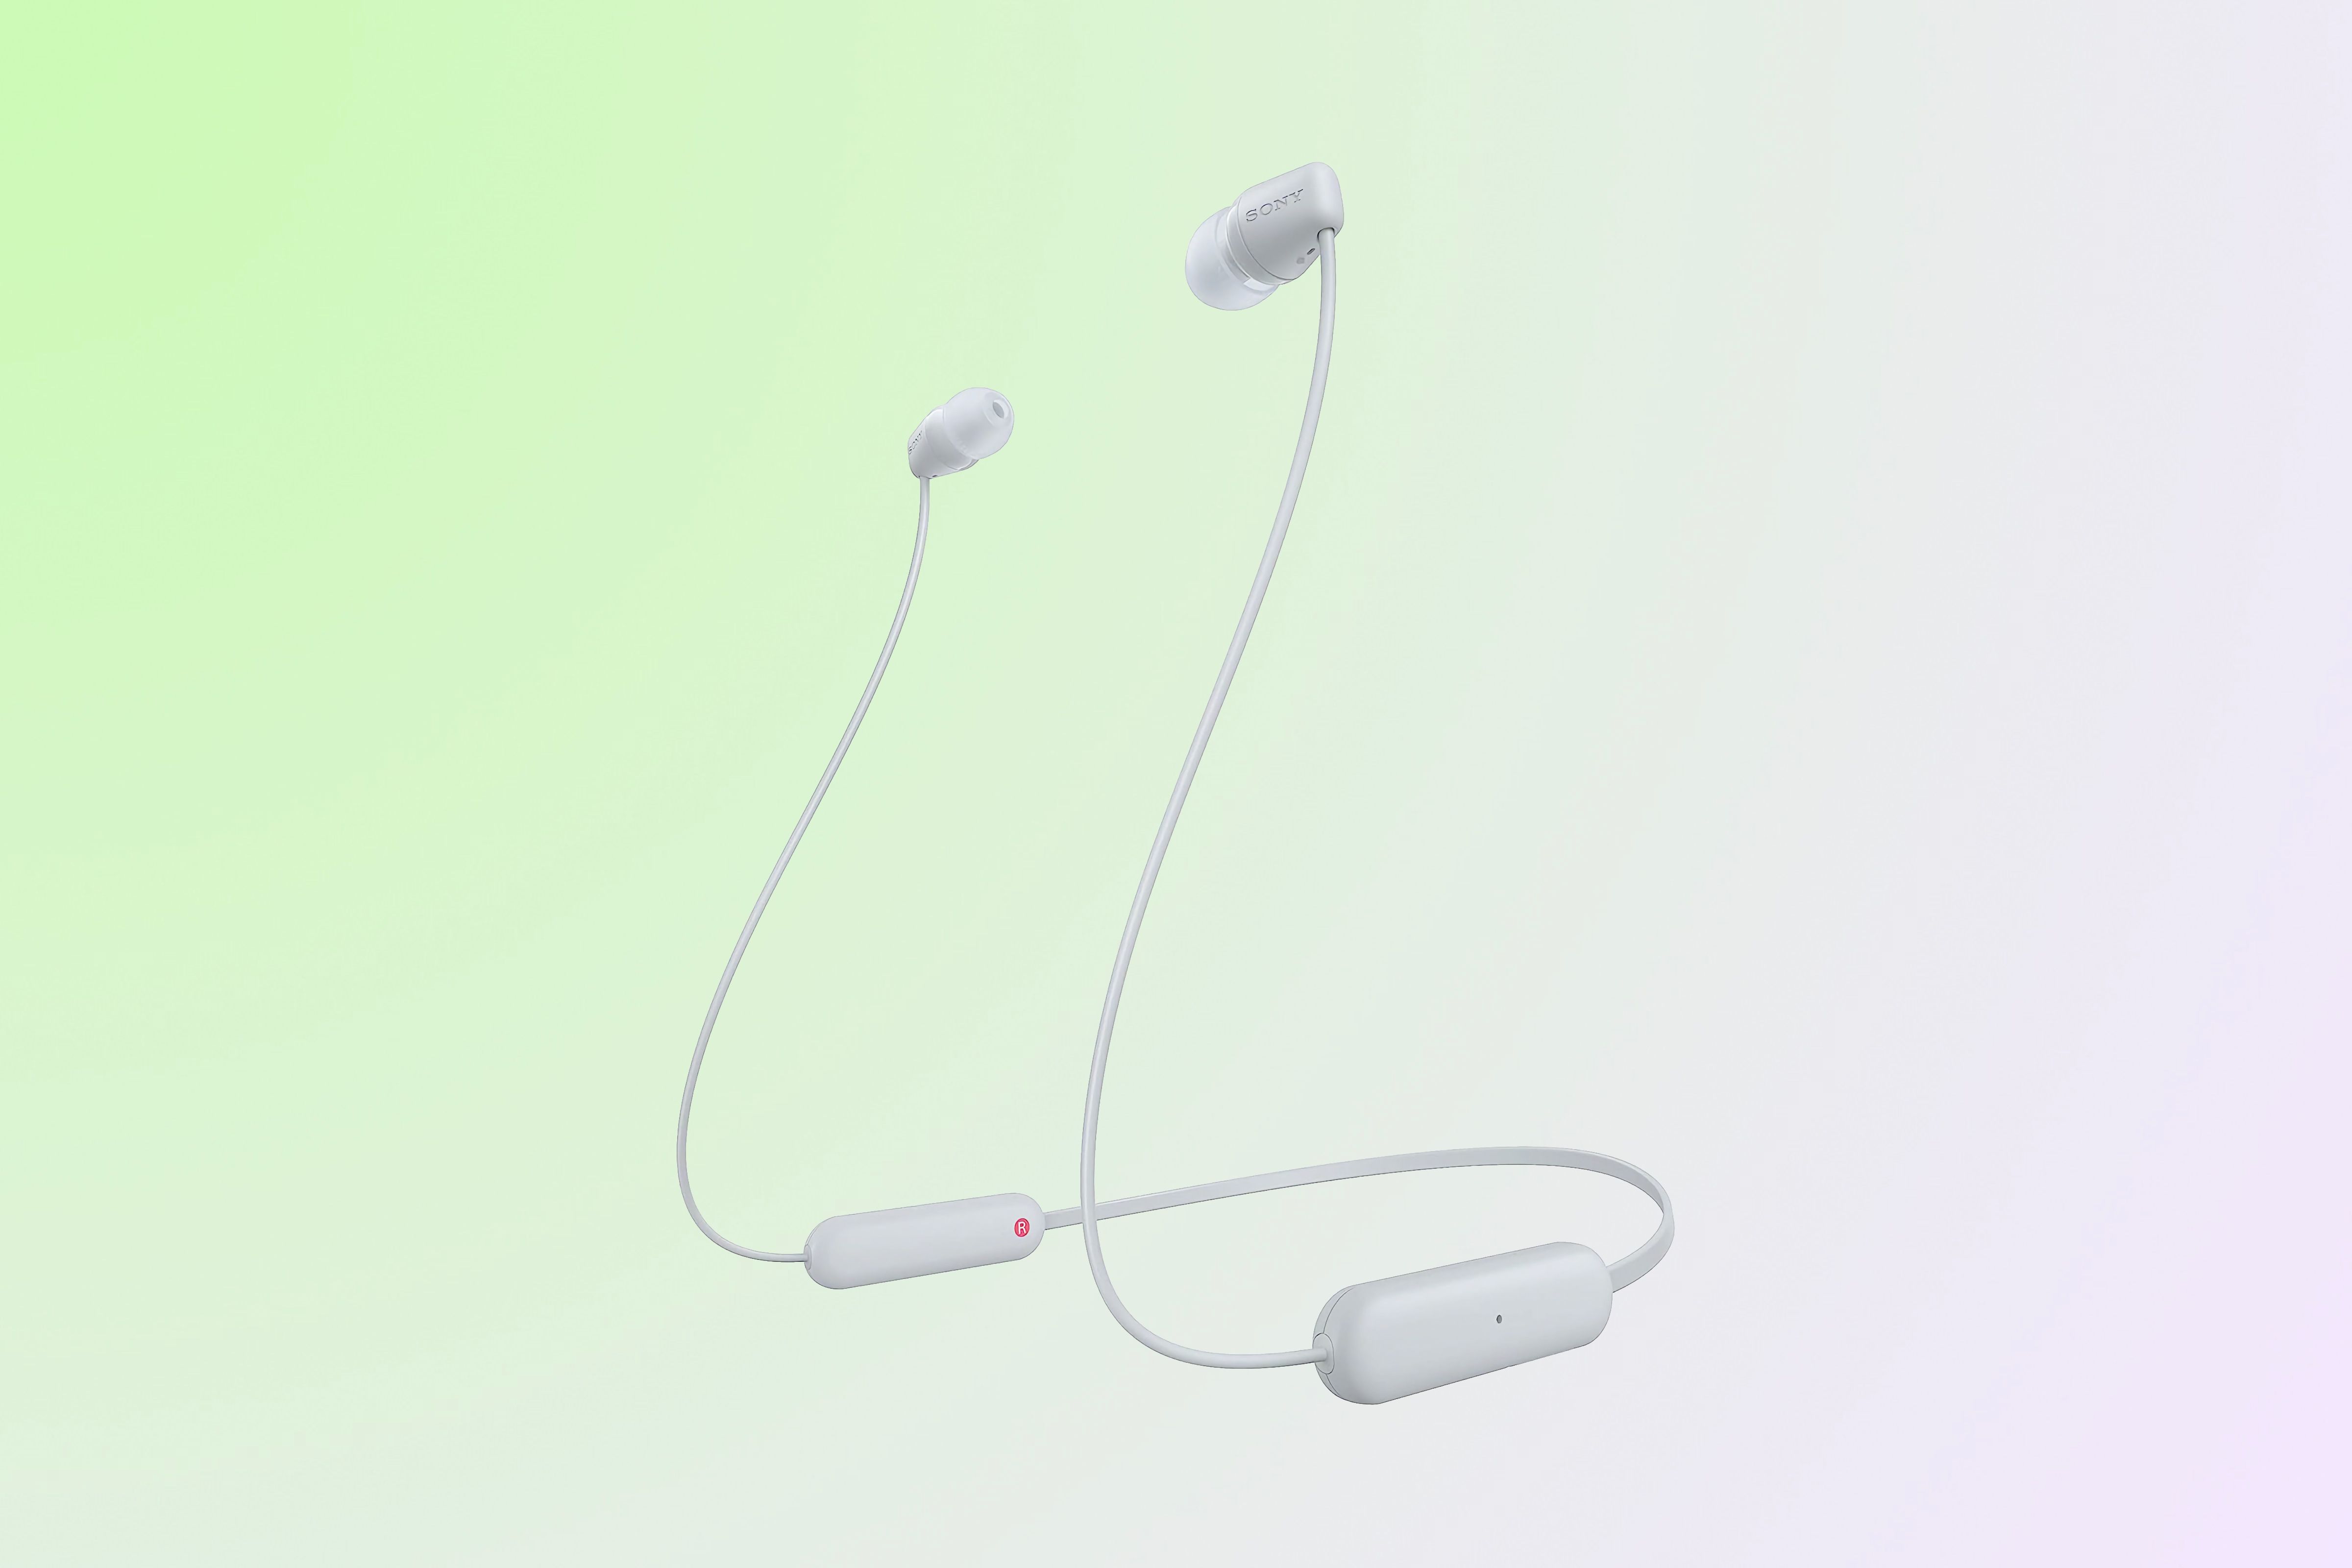 Wireless earbuds on a white cord with battery capsules on a bluish-green background.